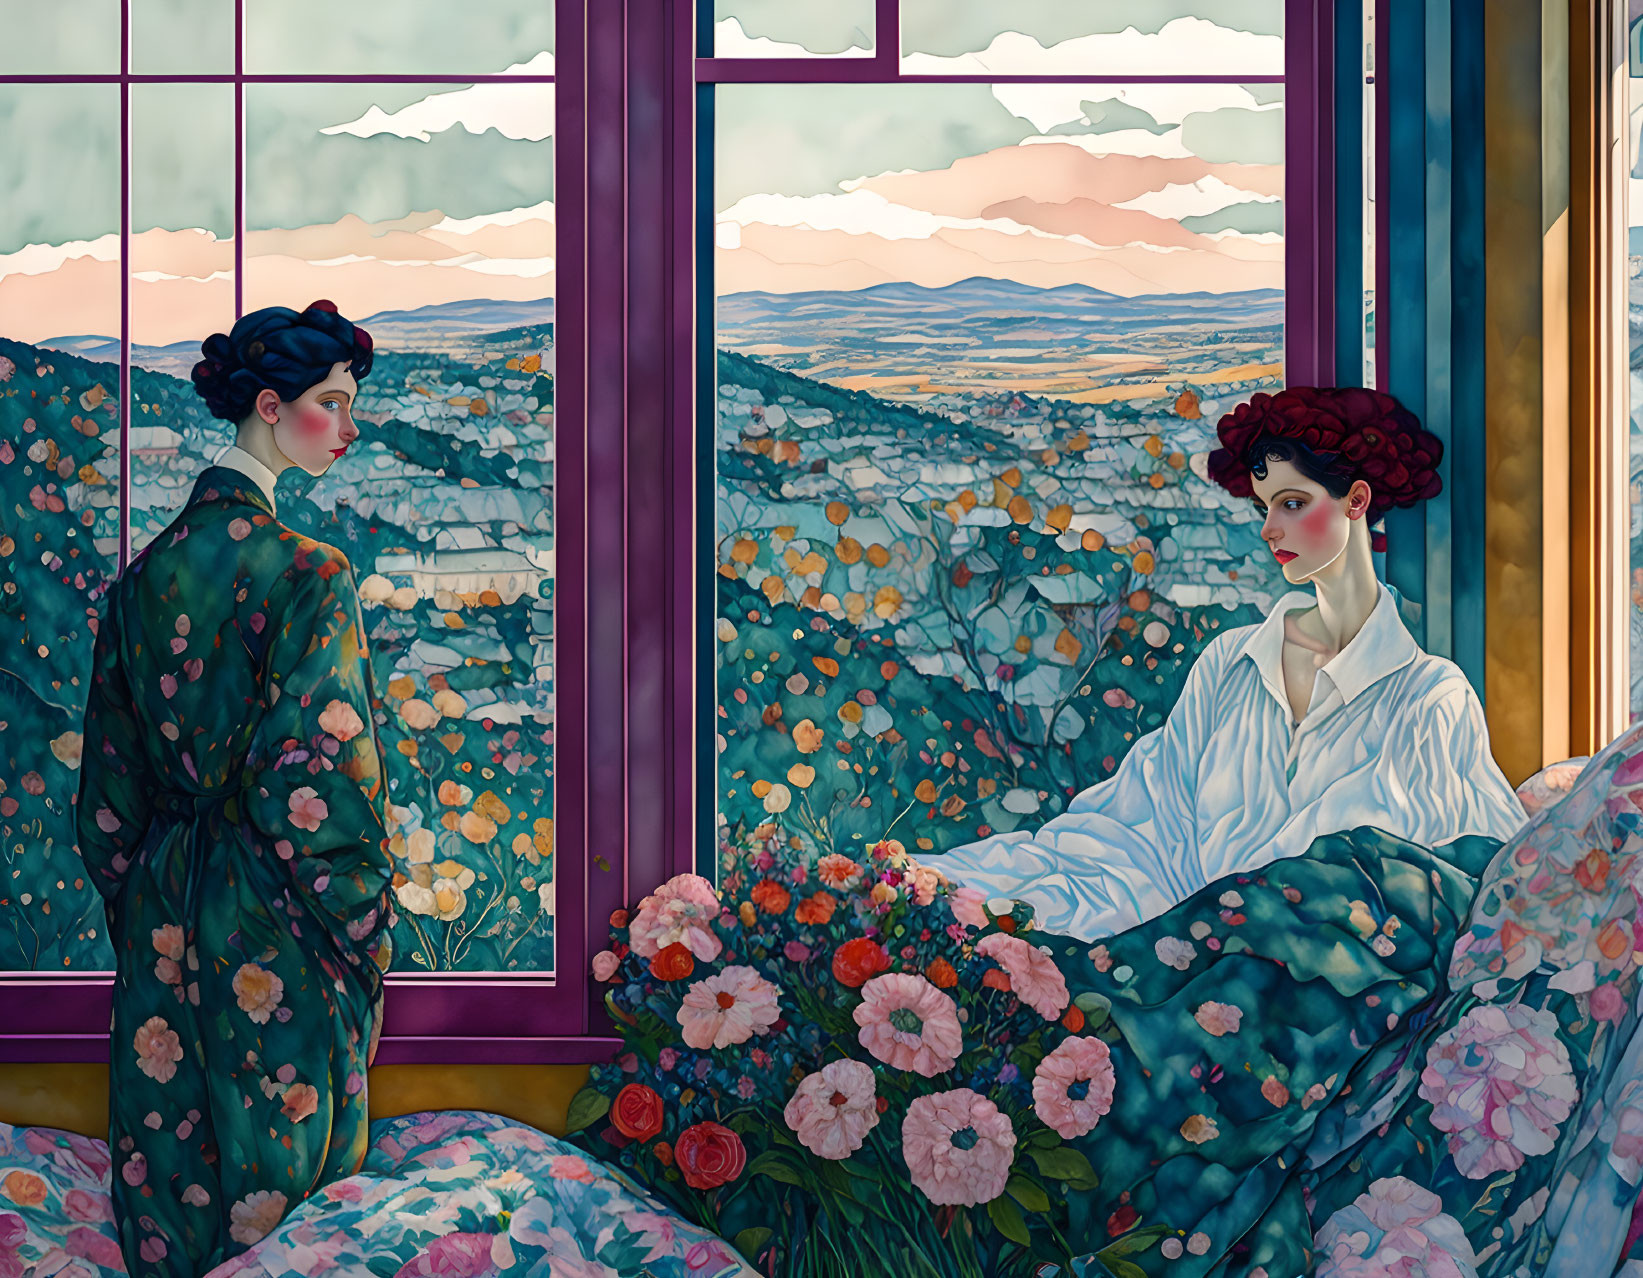 Conversation by the Window